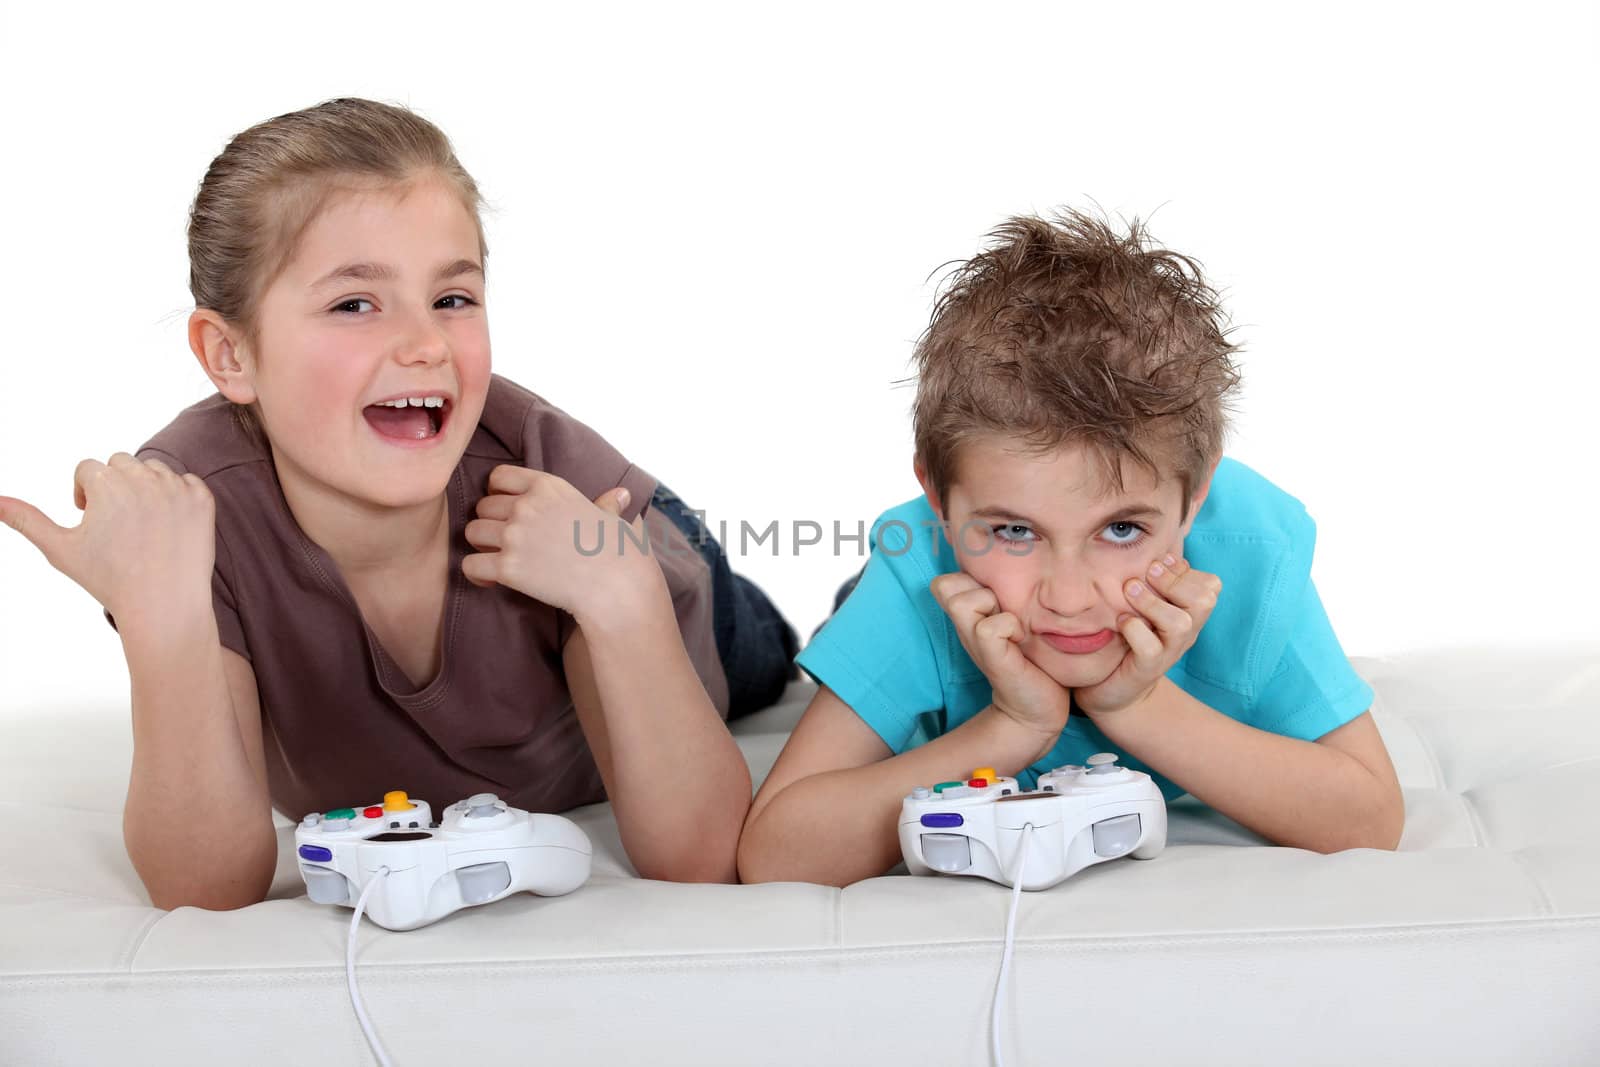 Children playing a games console by phovoir